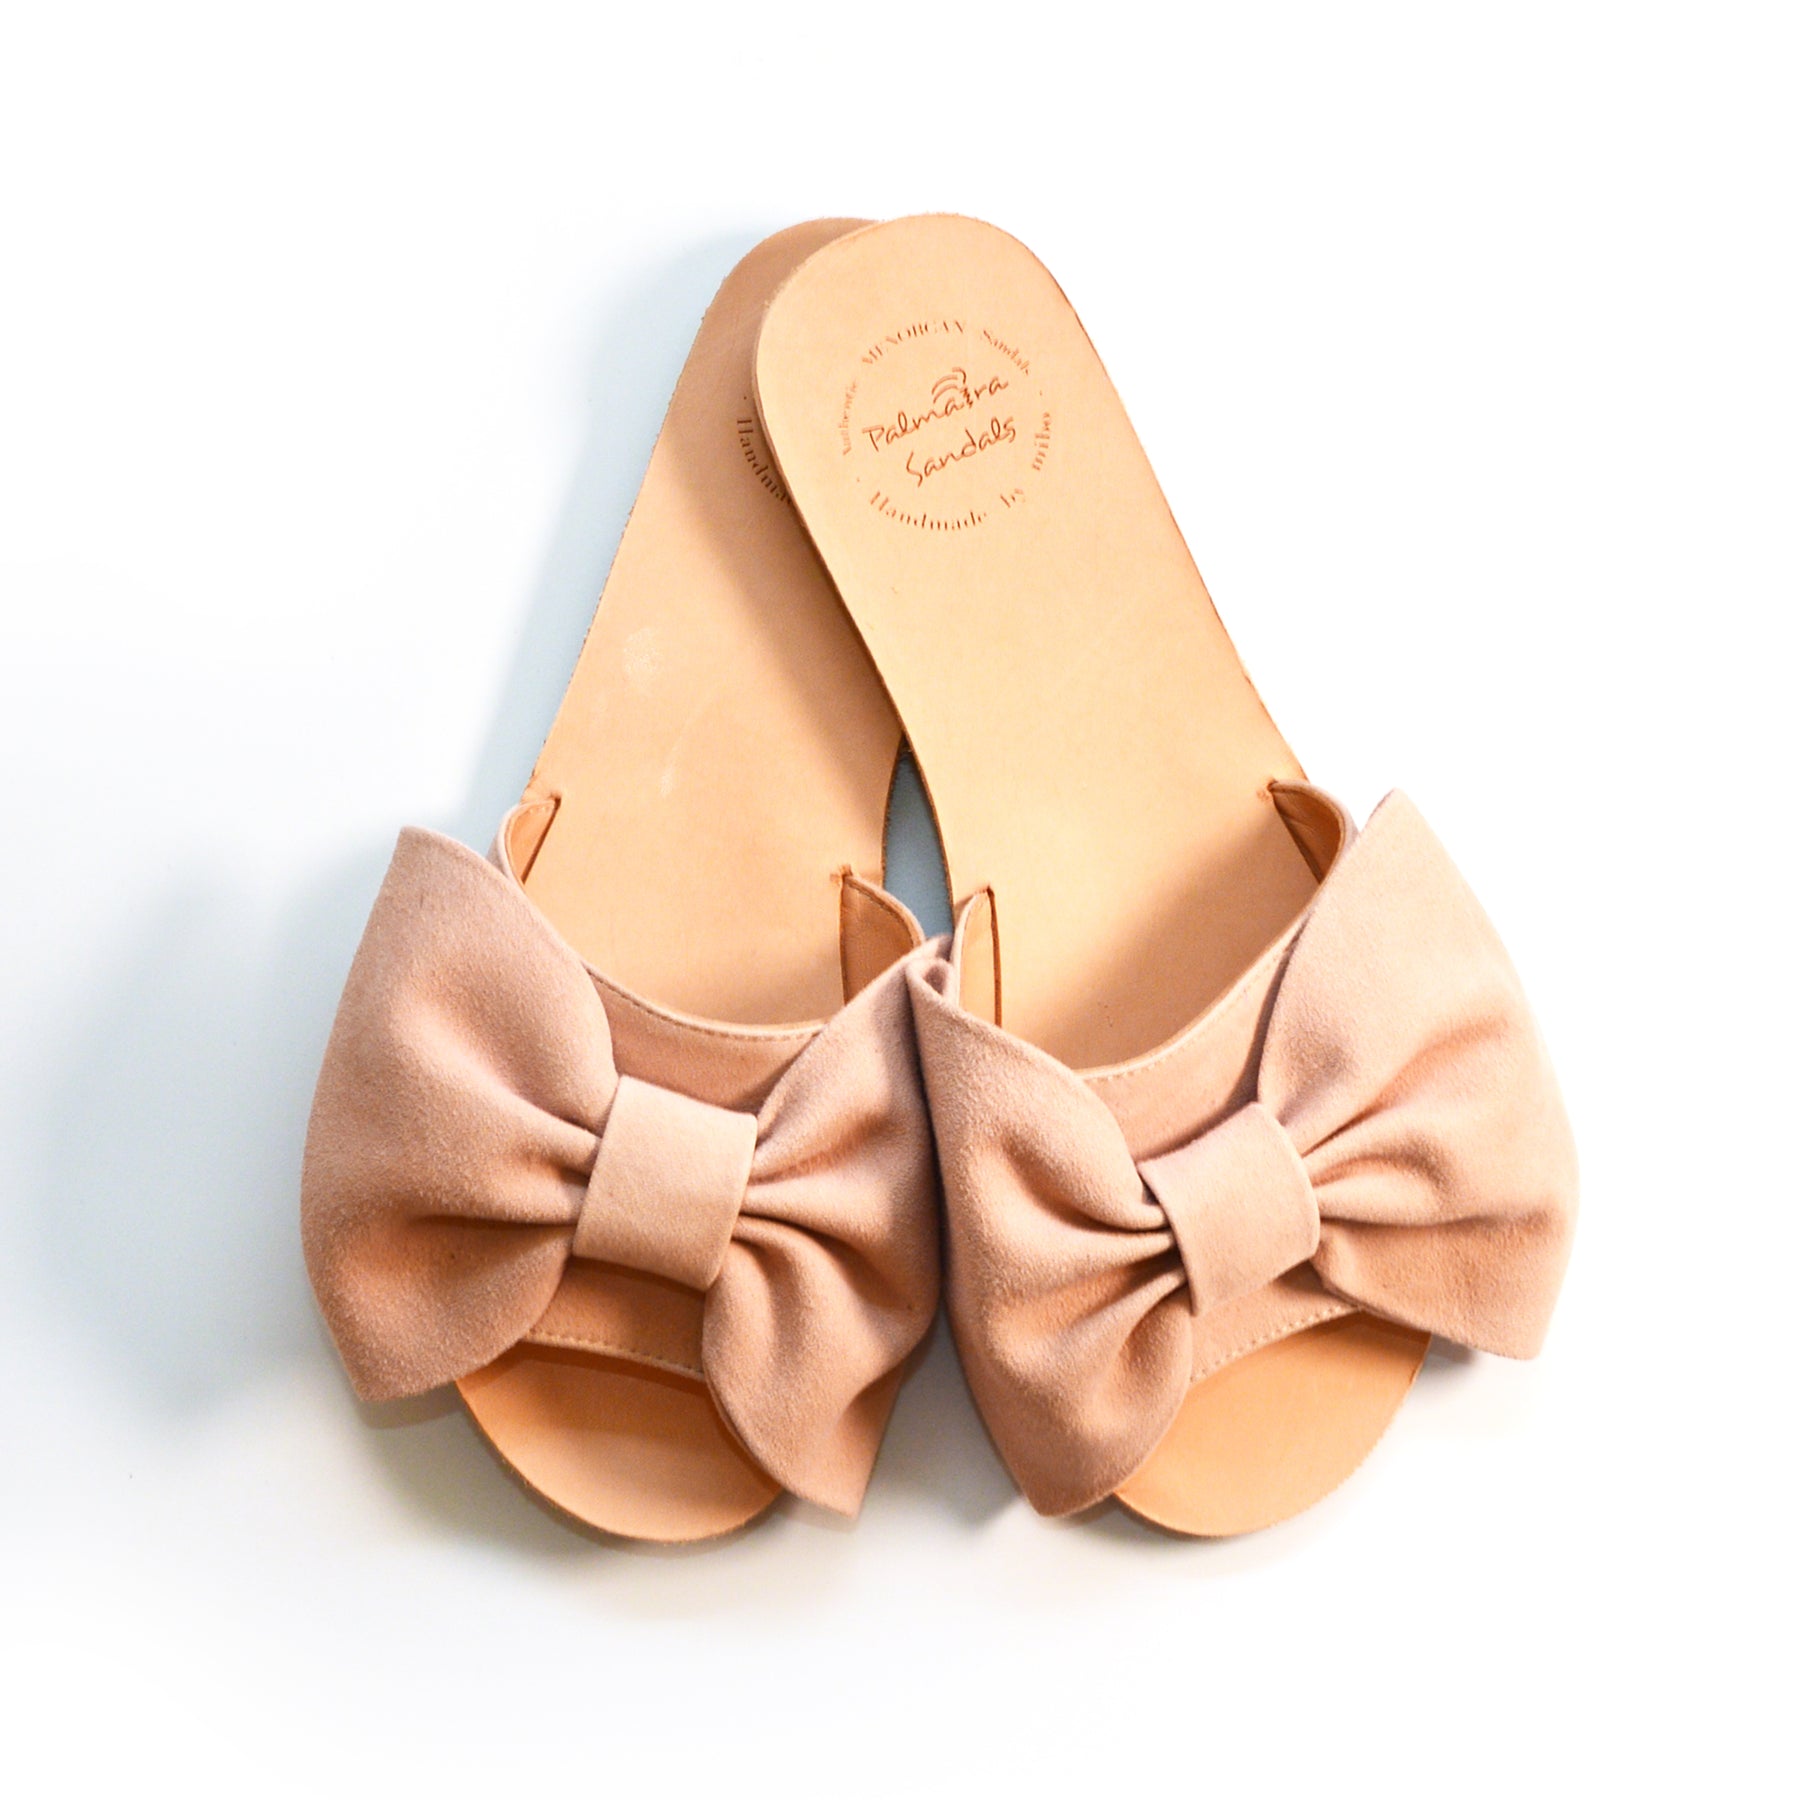 nude pink suede flat sandals with oversized bow sliders